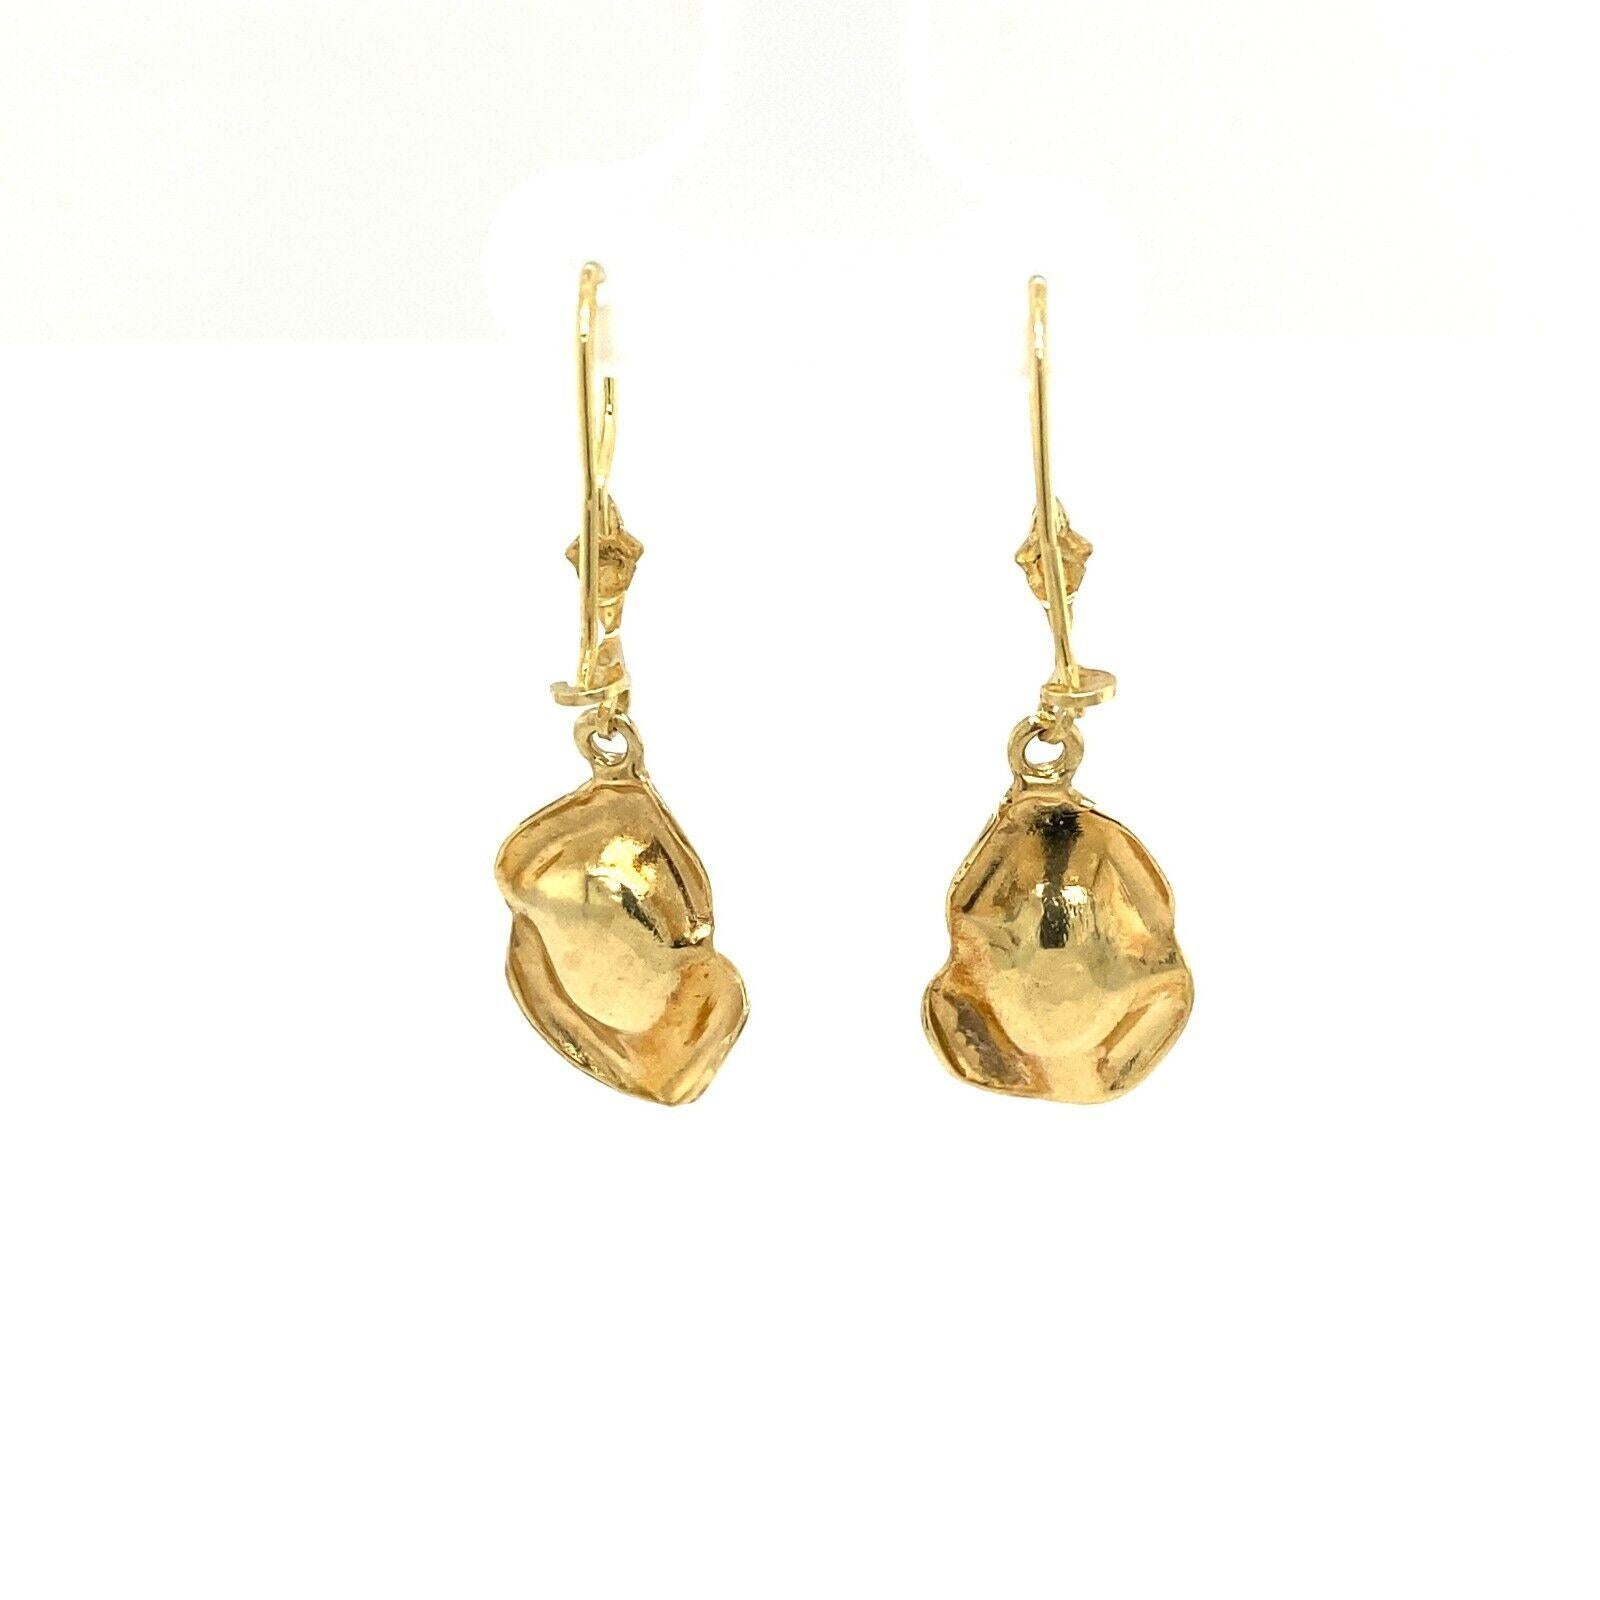 Freshwater Pearl drop Earrings, With Hook Fittings in 14ct Yellow Gold In Excellent Condition For Sale In London, GB